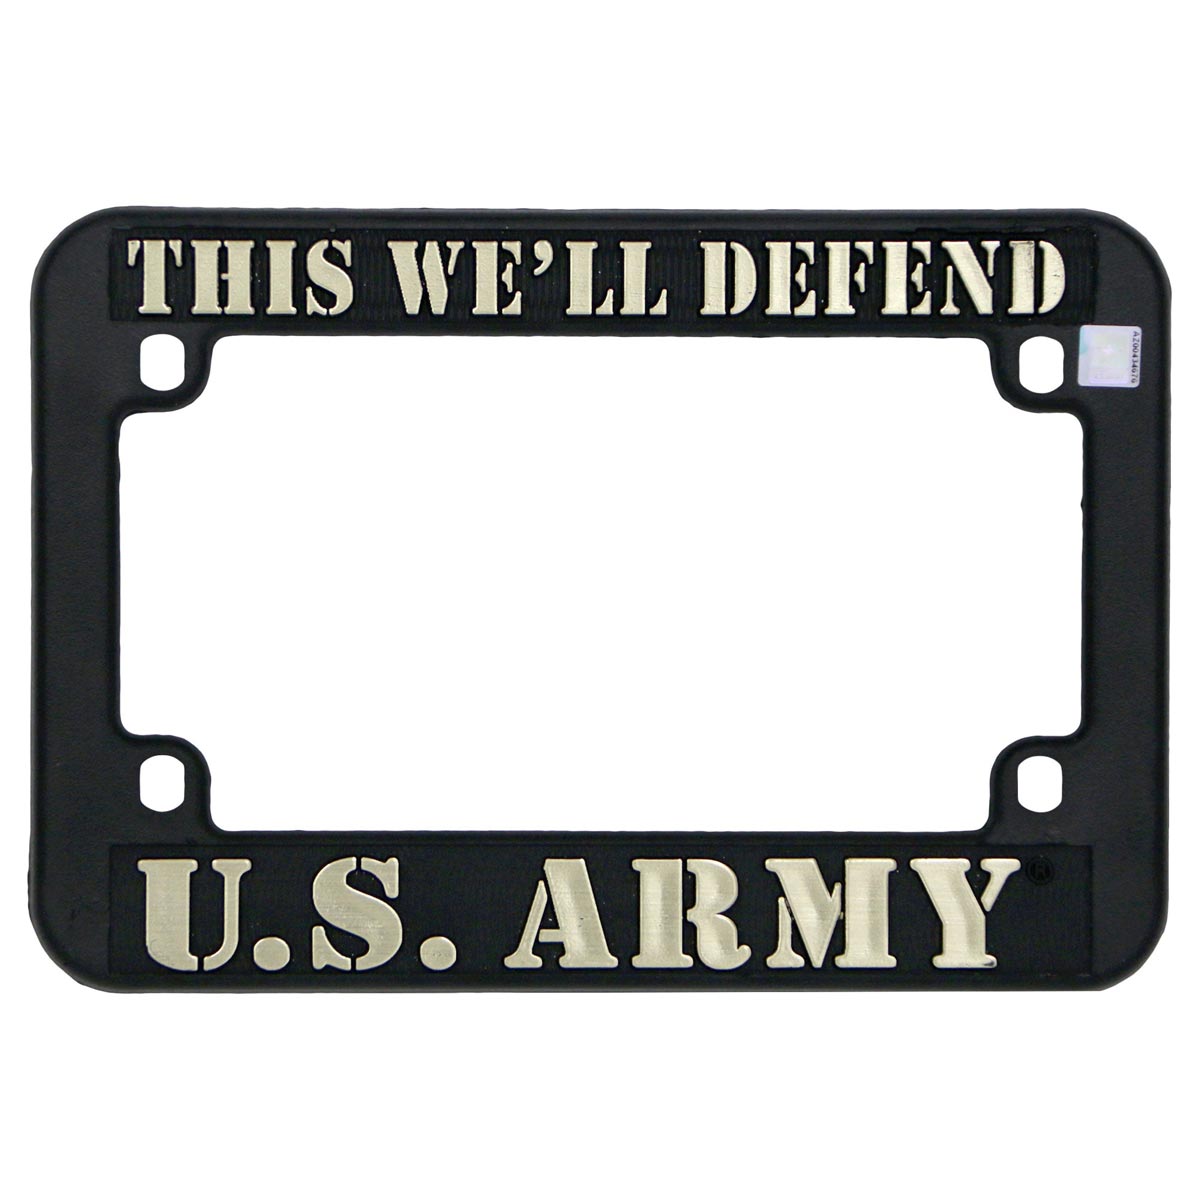 Hot Leathers MPA1706 This We'll Defend U.S. Army License Plate Frame for Motorcycles